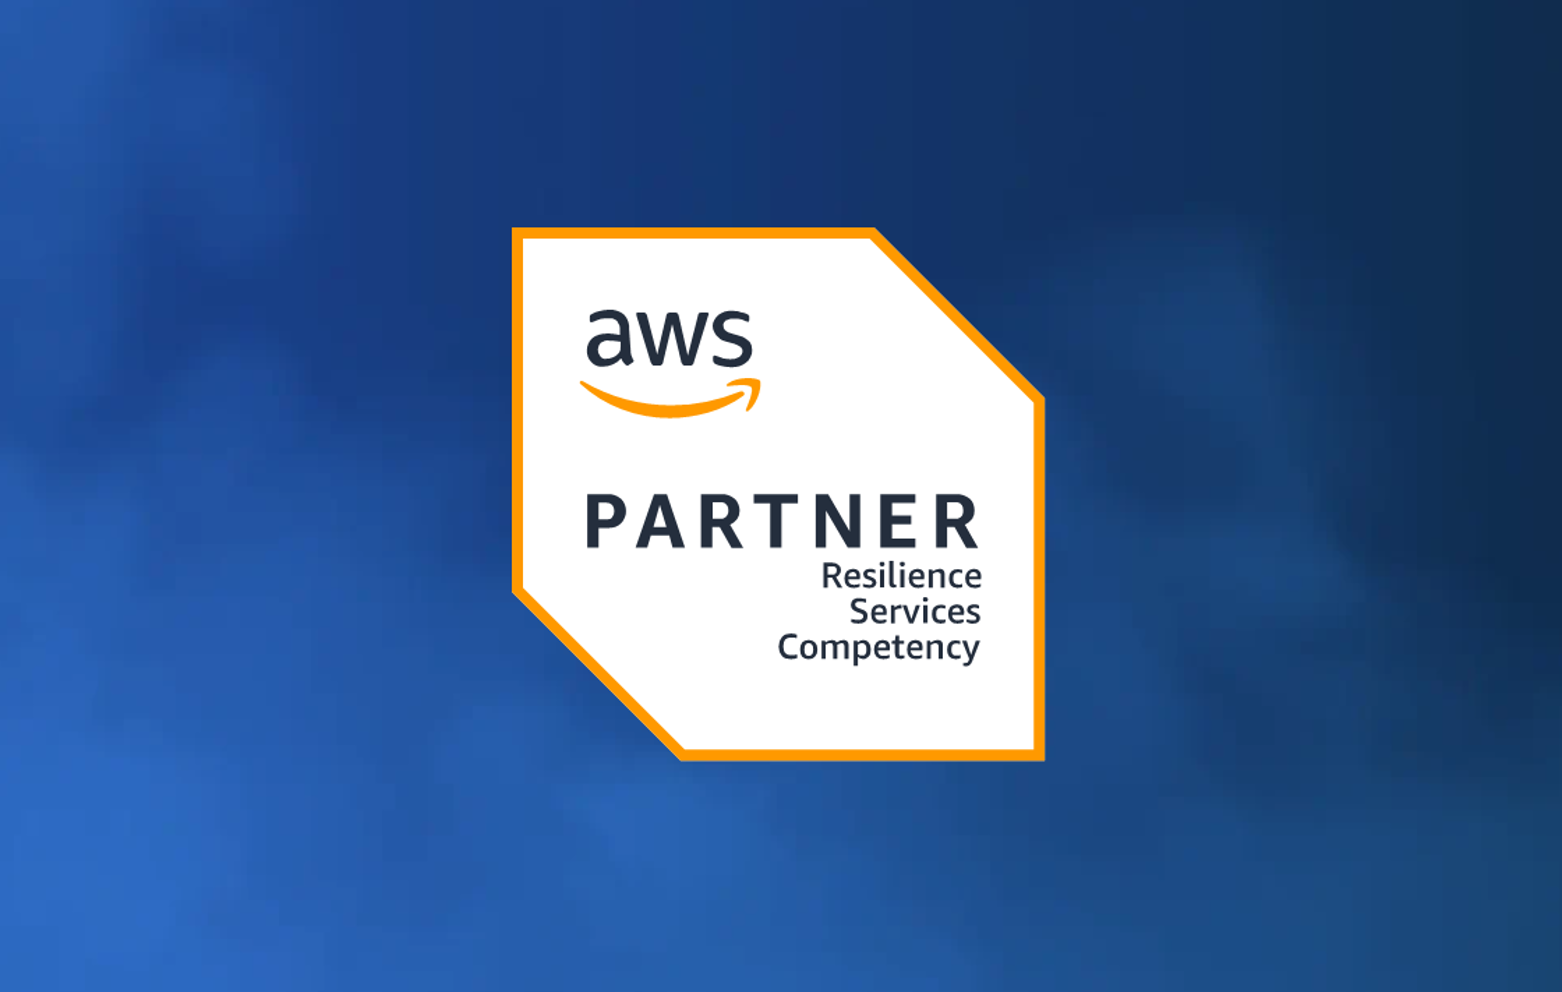 Bexprt achieves the specialized AWS Resilience Competency milestone